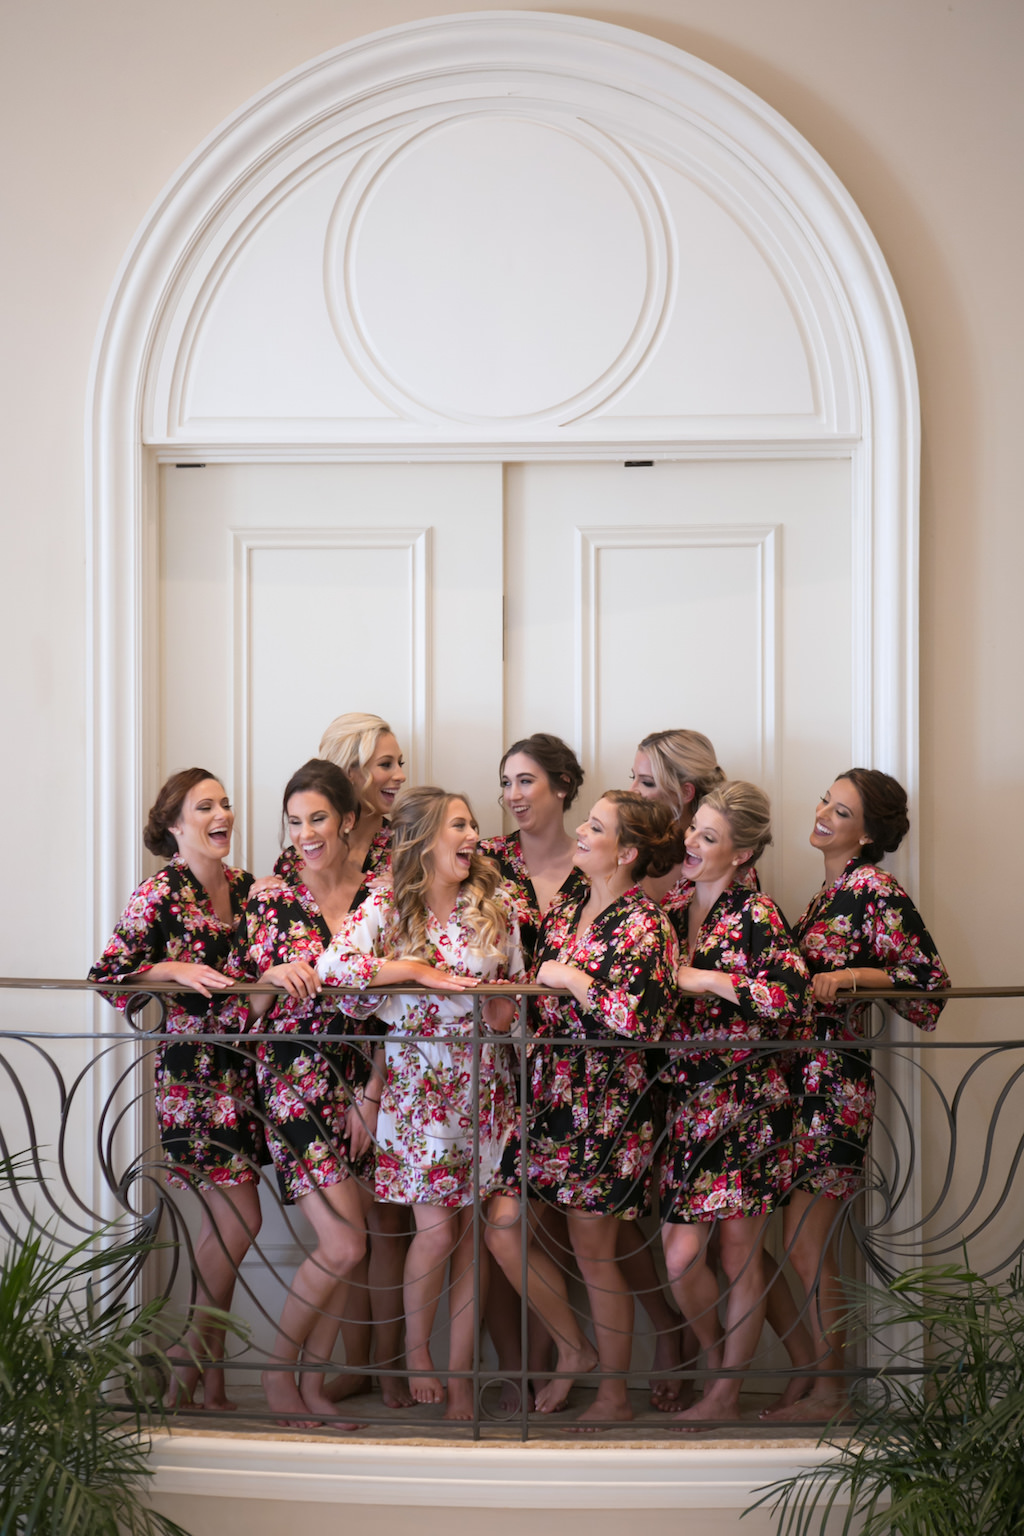 Balcony Bridal Party Getting Ready Portrait, Bridesmaids in Matching Black and Pink Floral Silk Robes, Bride in White Floral Silk Robe | Sarasota Wedding Photography Carrie Wildes Photography